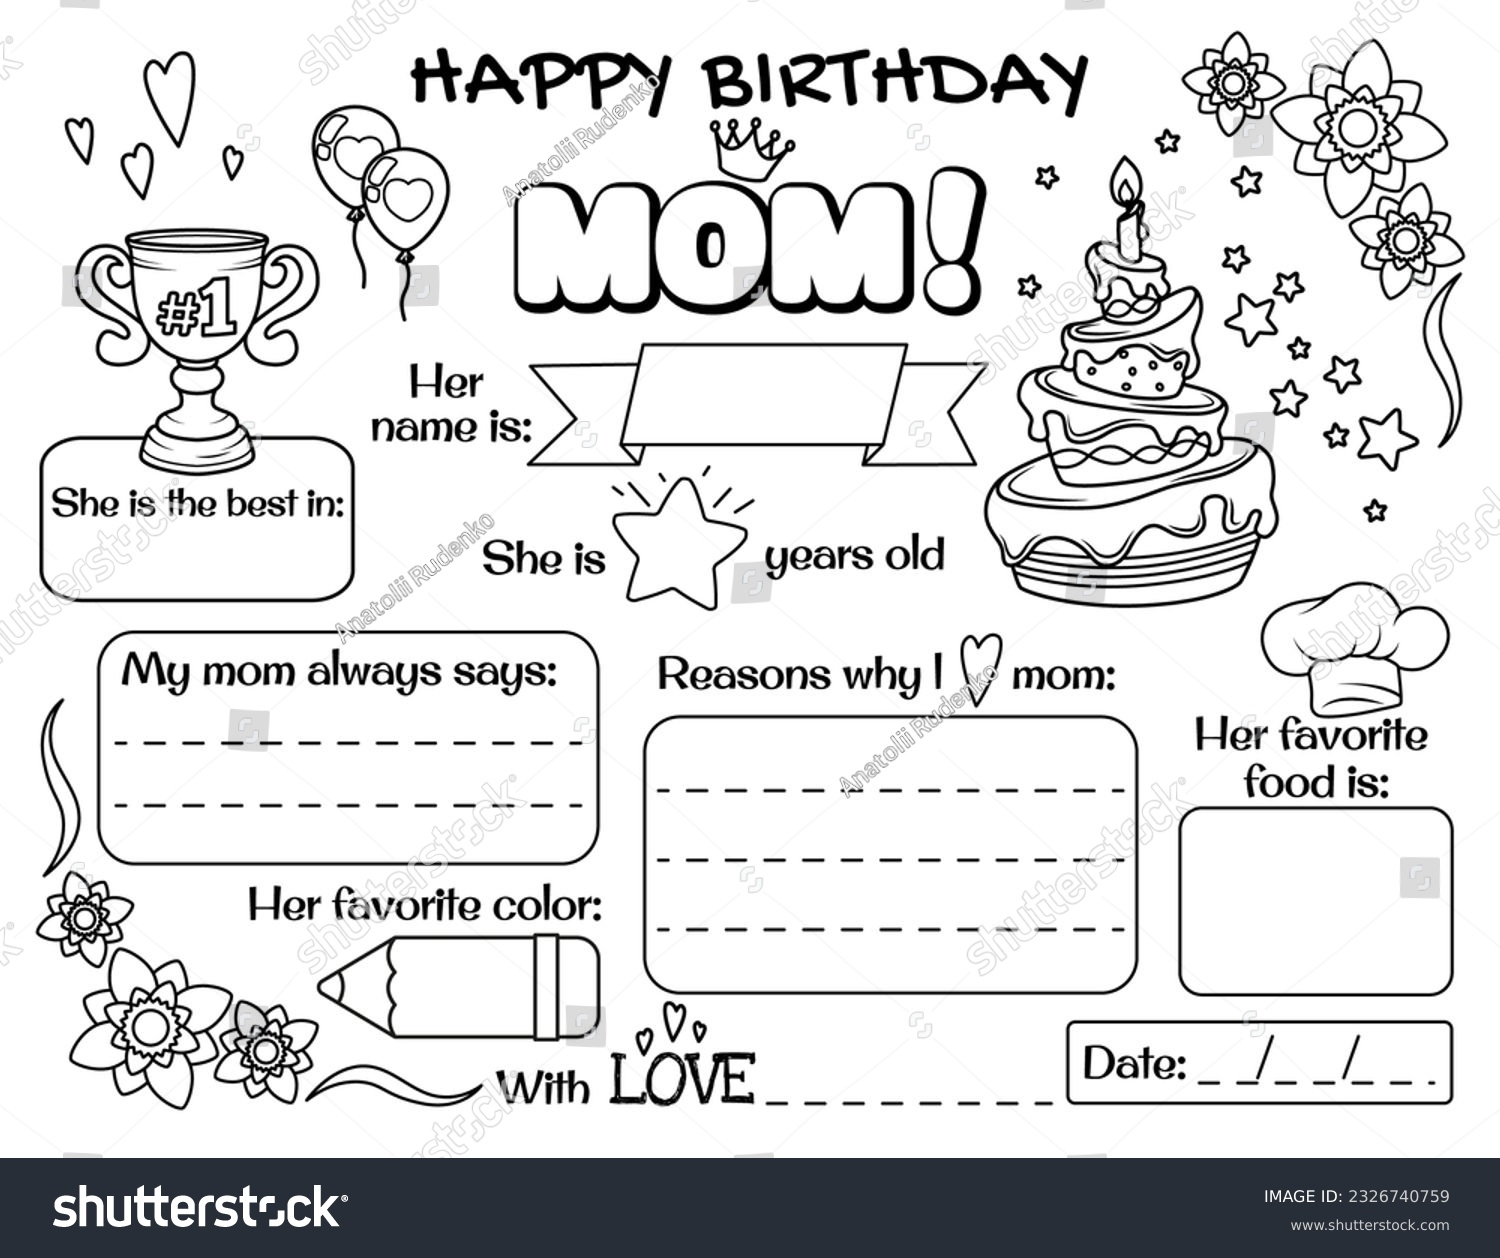 48 Printable Coloring Birthday Cards Mom Images Stock Photos 3D Objects Vectors Shutterstock - Free Printable Birthday Cards For Mom